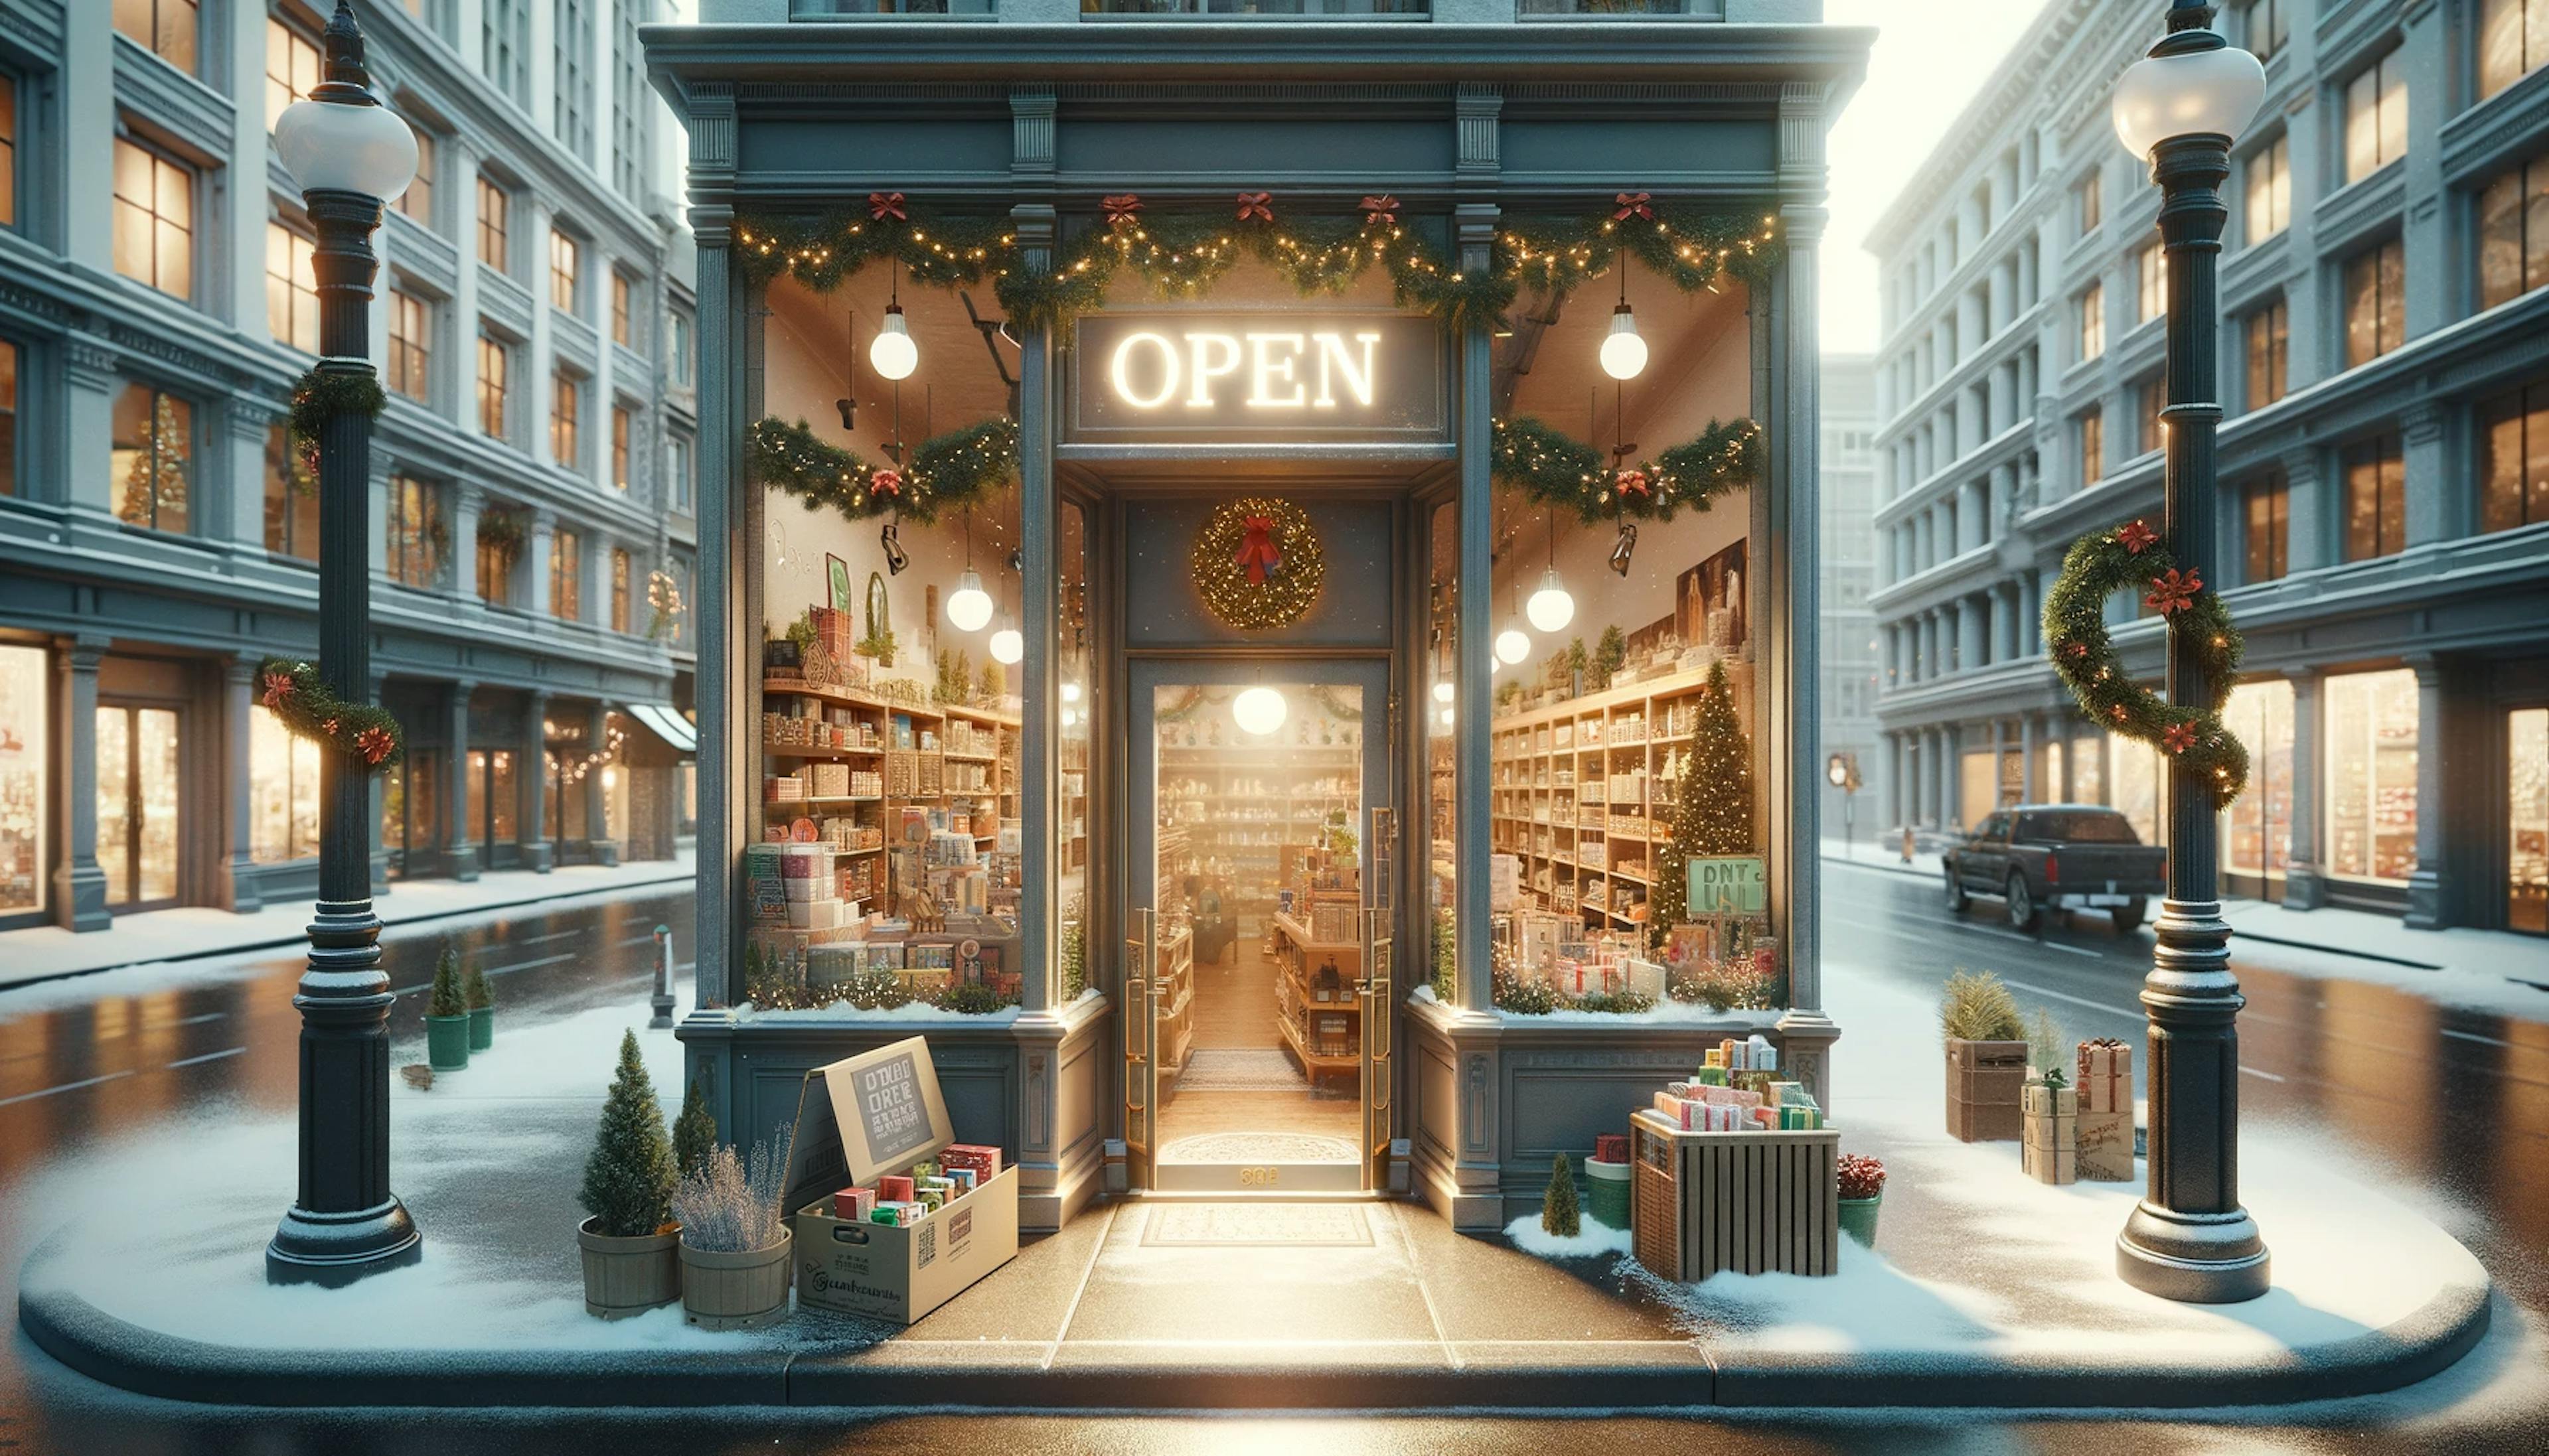 an open store on Christmas Day in an urban setting. Explore the festive environment of the store and its surroundings